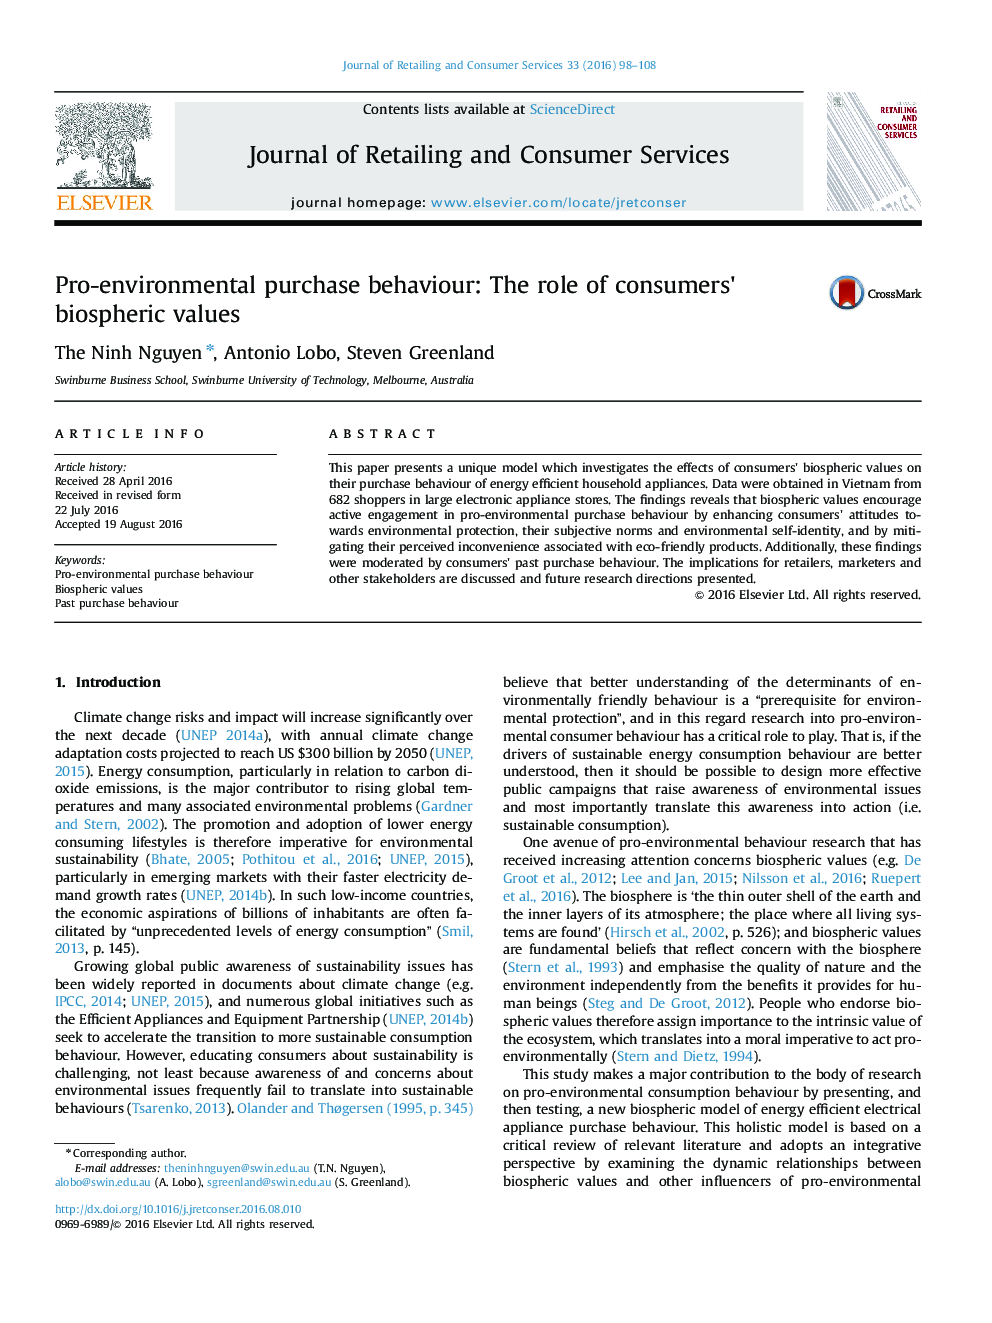 Pro-environmental purchase behaviour: The role of consumers' biospheric values